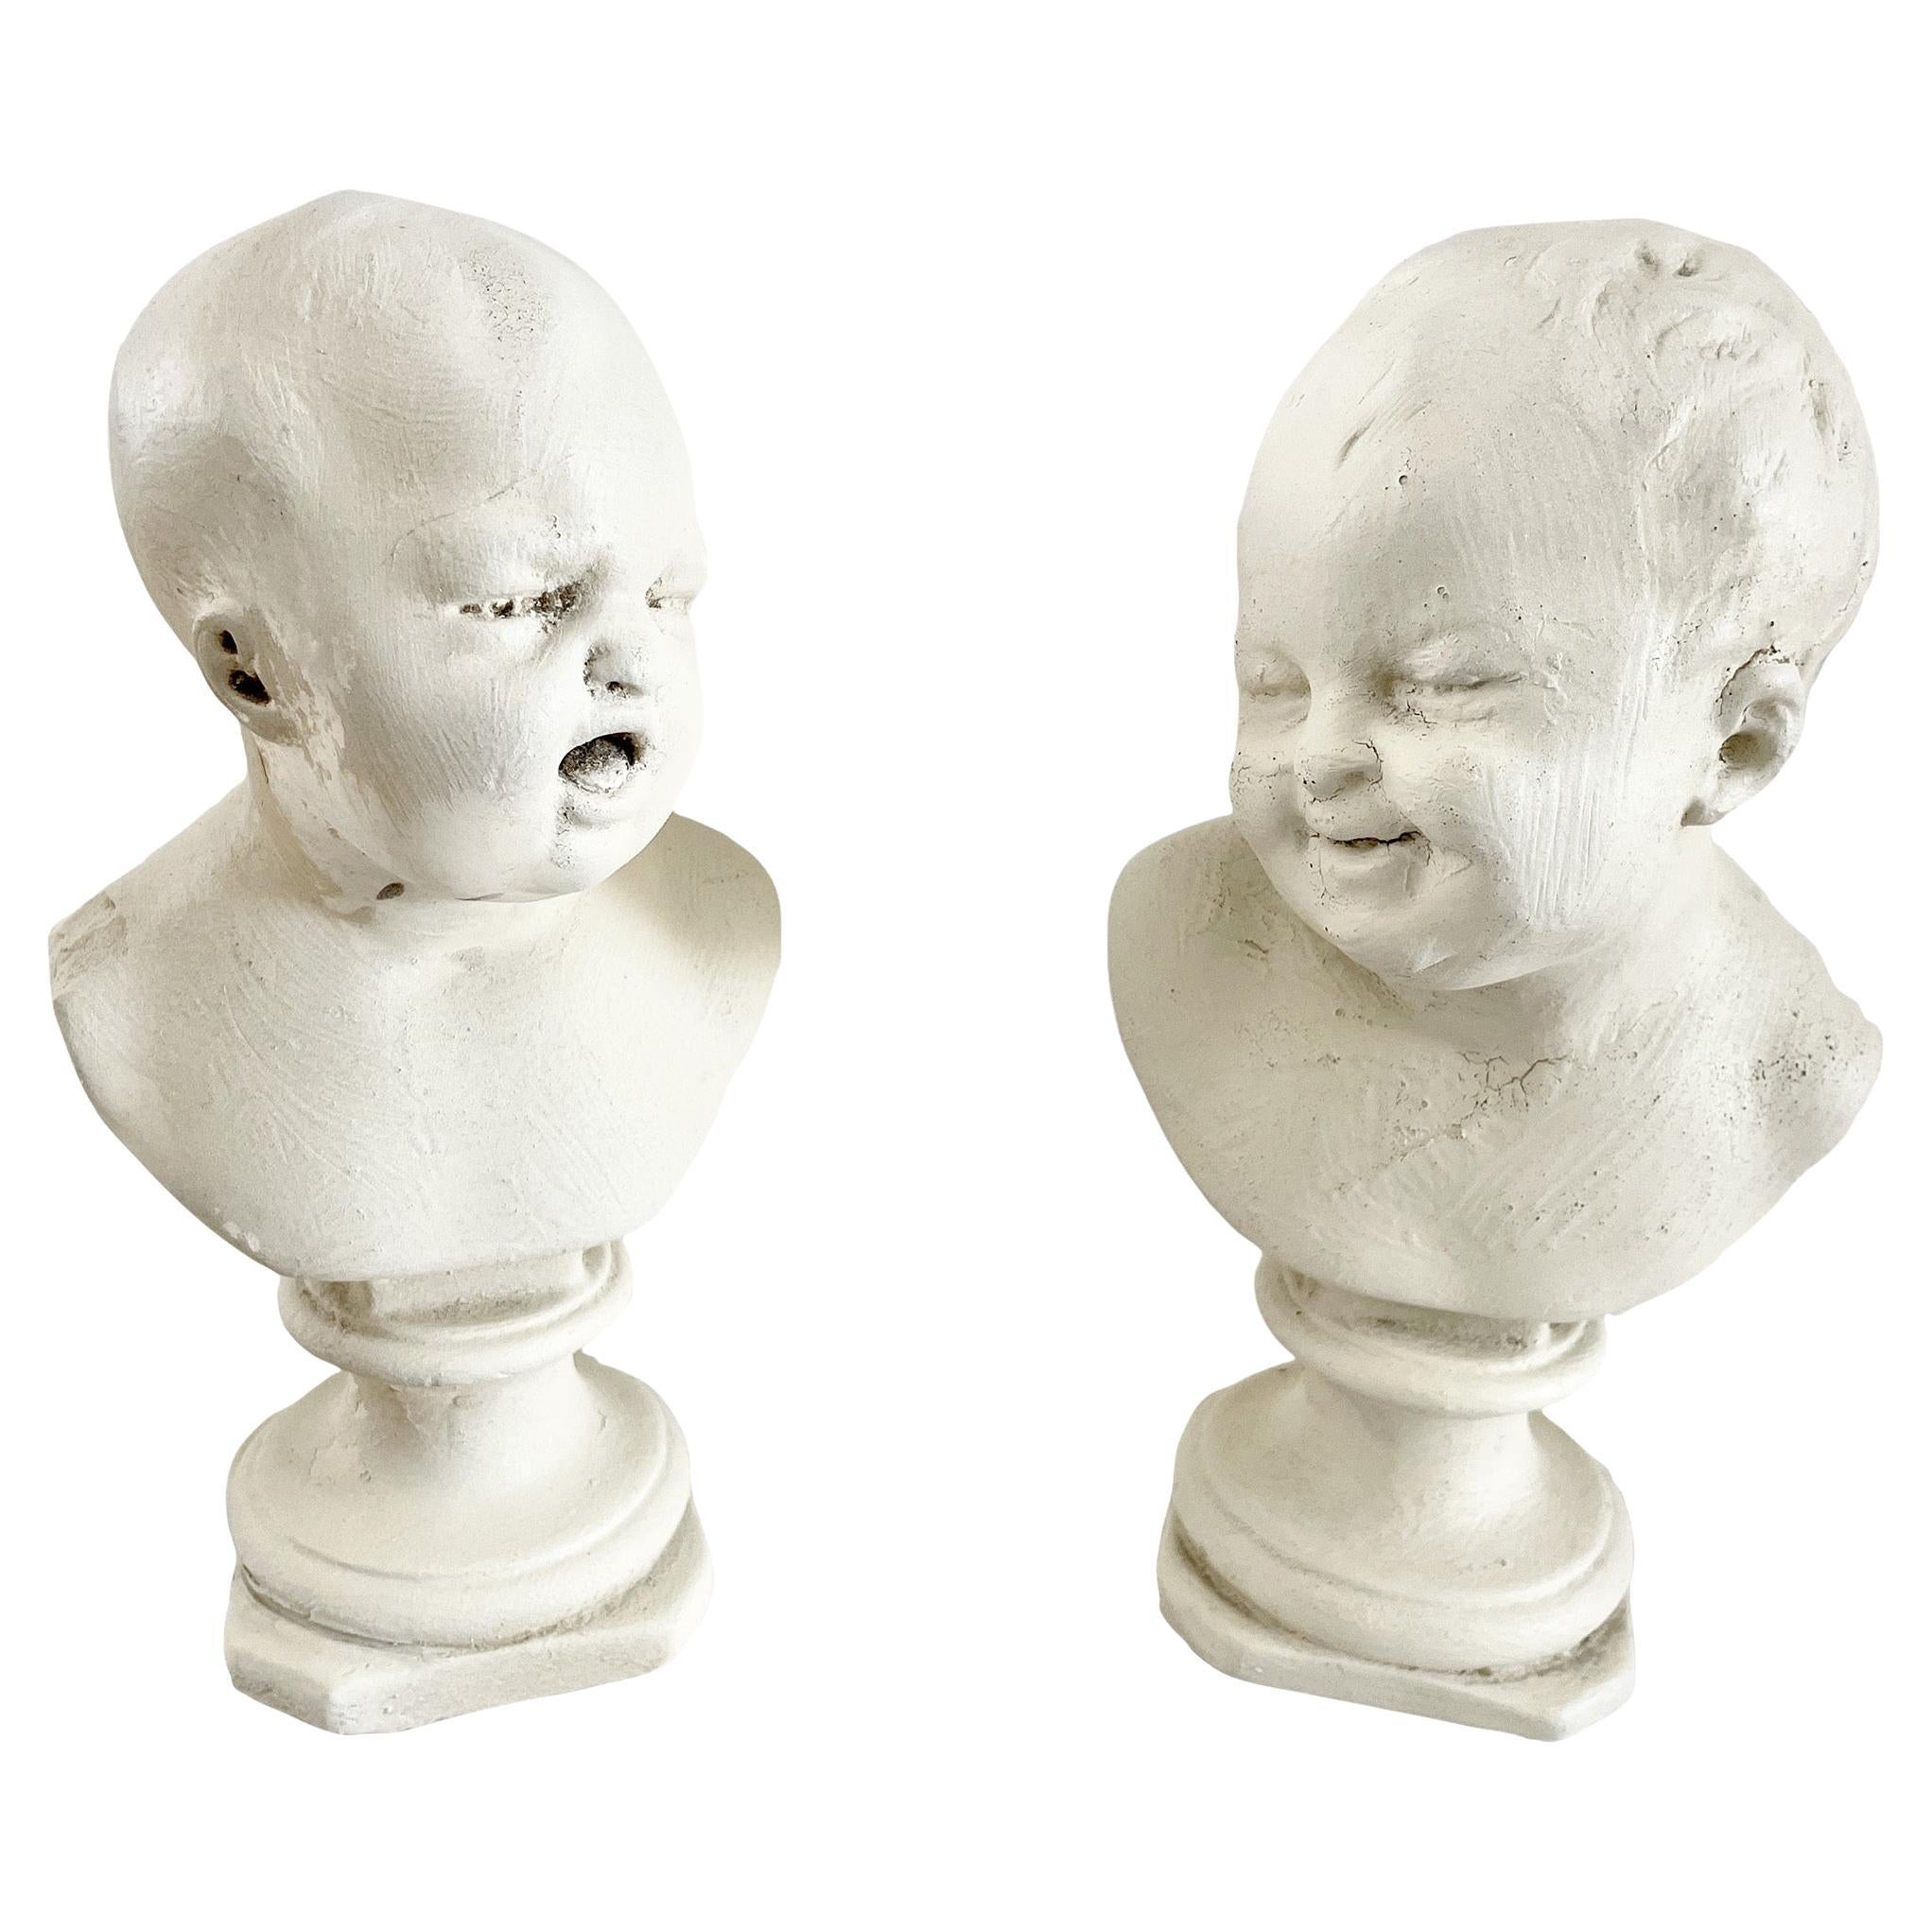 Houdin Busts of Happy Baby and Crying Baby, a Pair